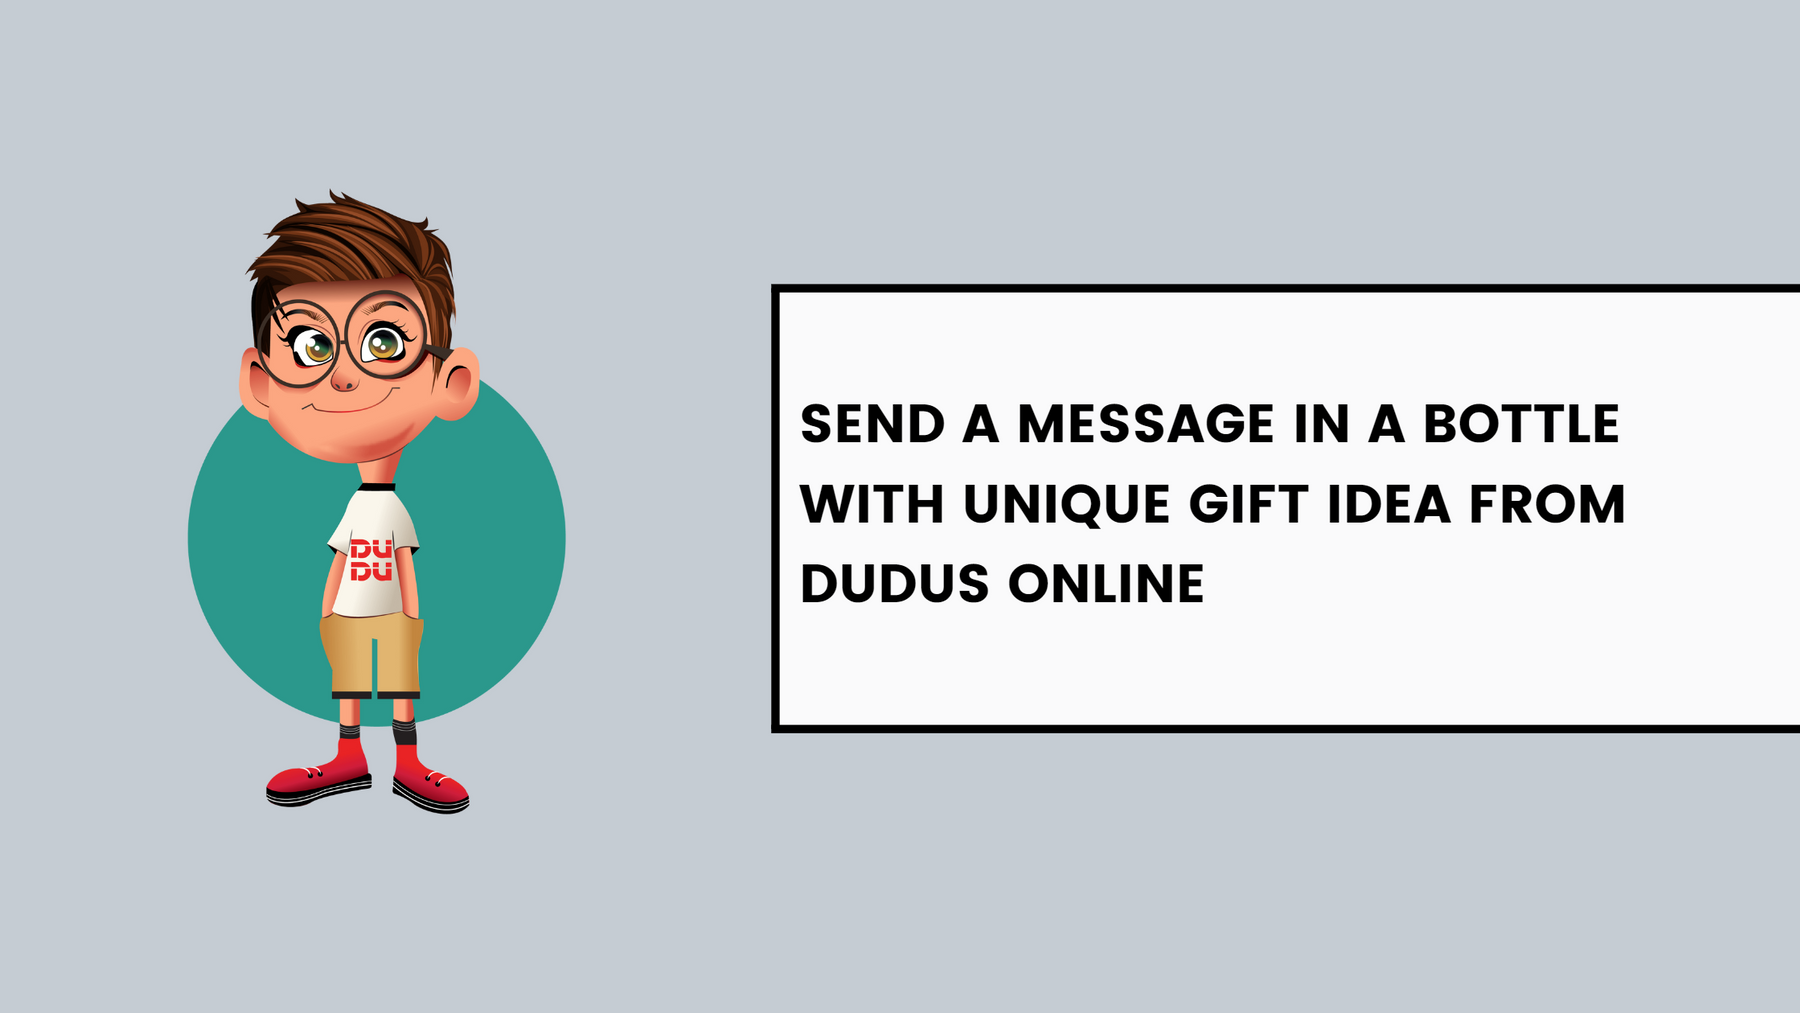 Send A Message In A Bottle With Unique Gift Idea From Dudus Online